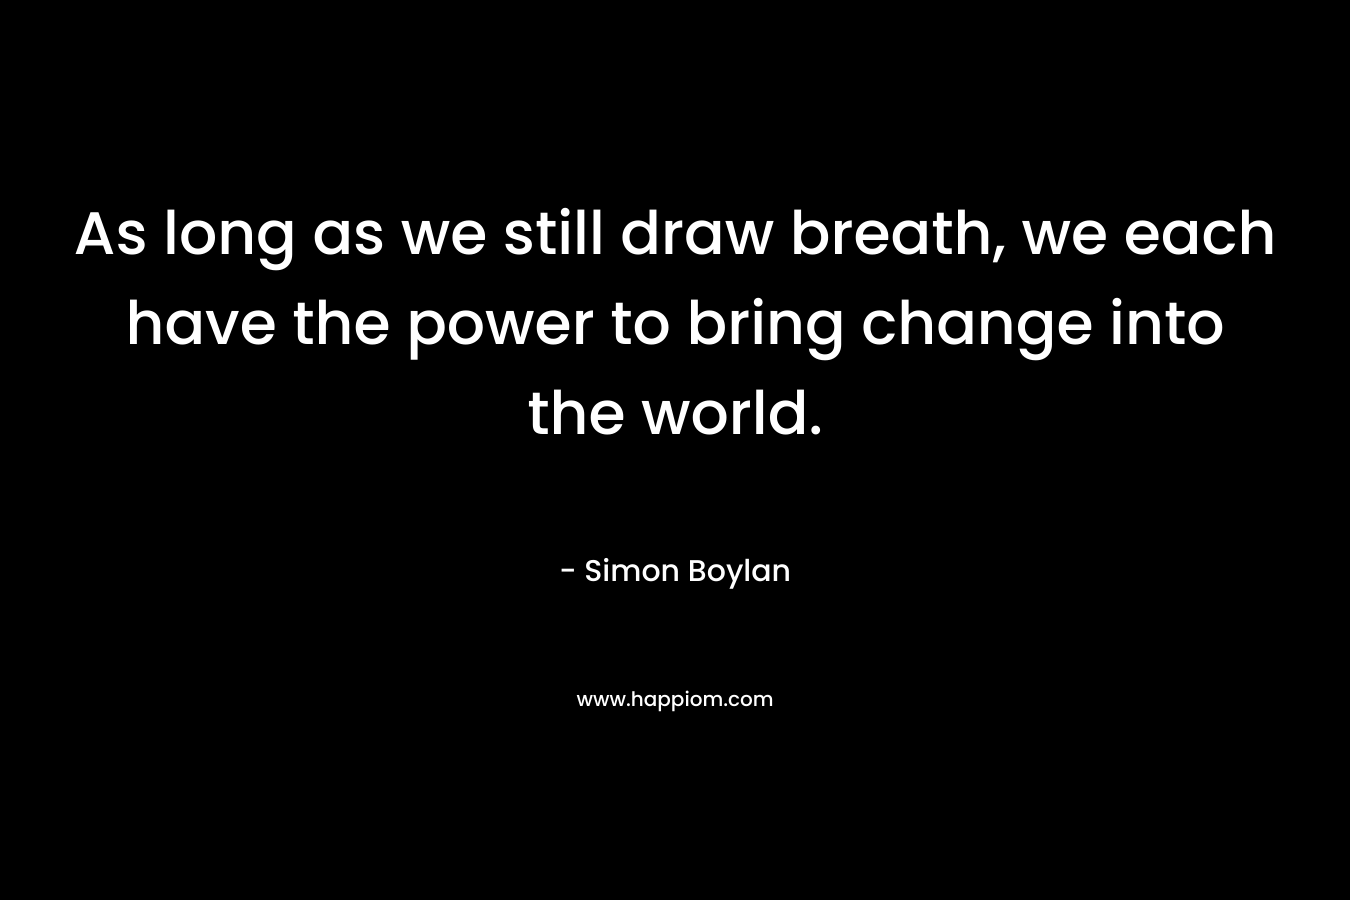 As long as we still draw breath, we each have the power to bring change into the world. – Simon Boylan